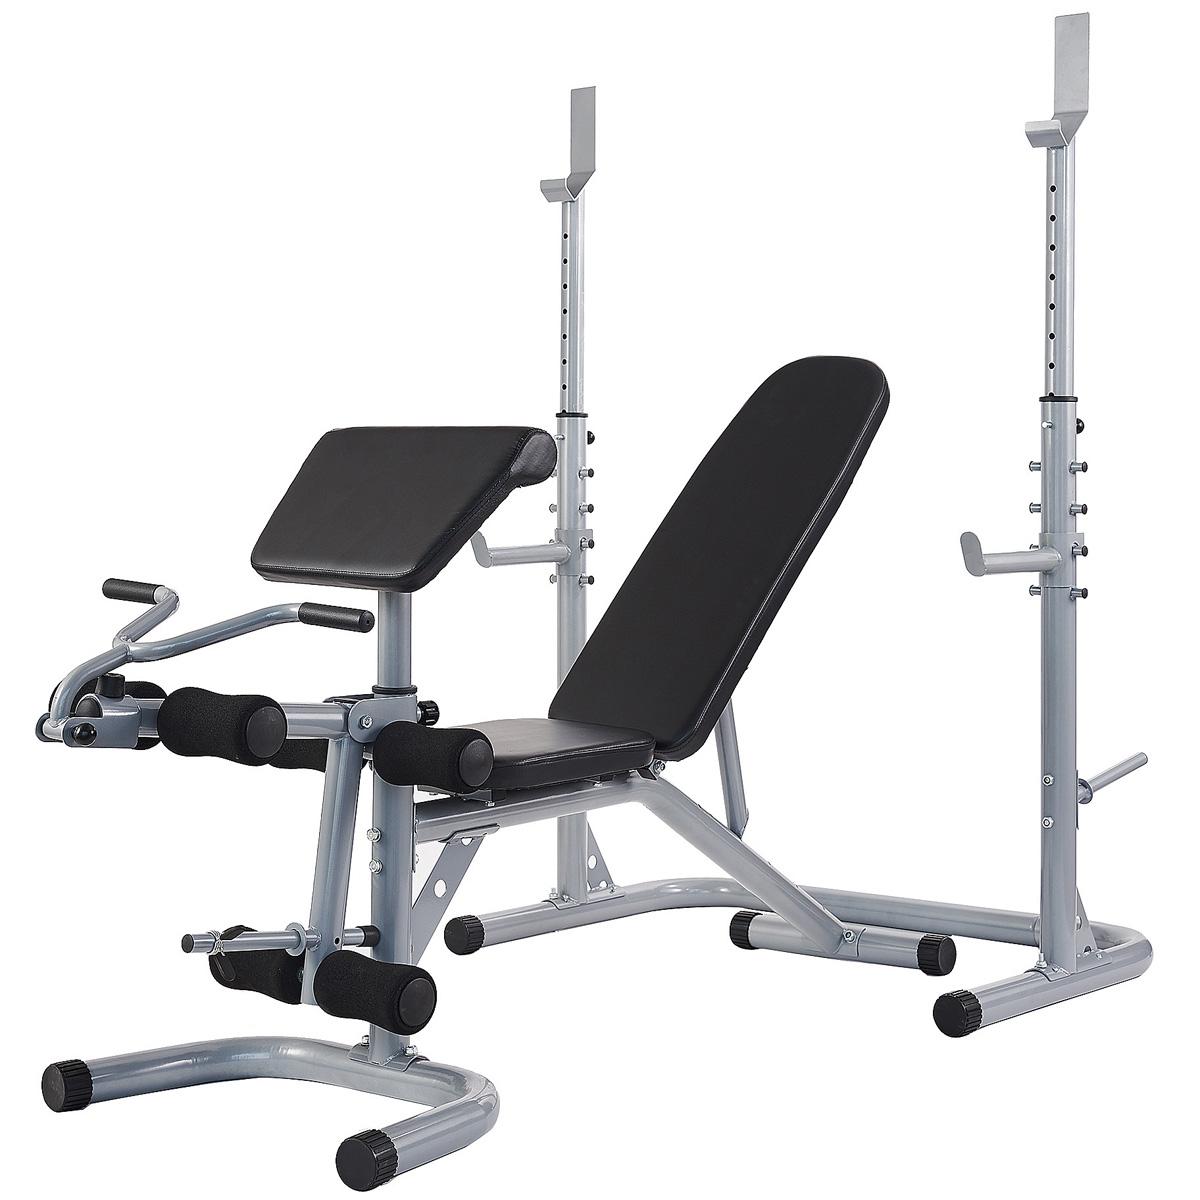 Everyday Essentials RS 60 Multifunctional Workout Station for $129.99 Shipped